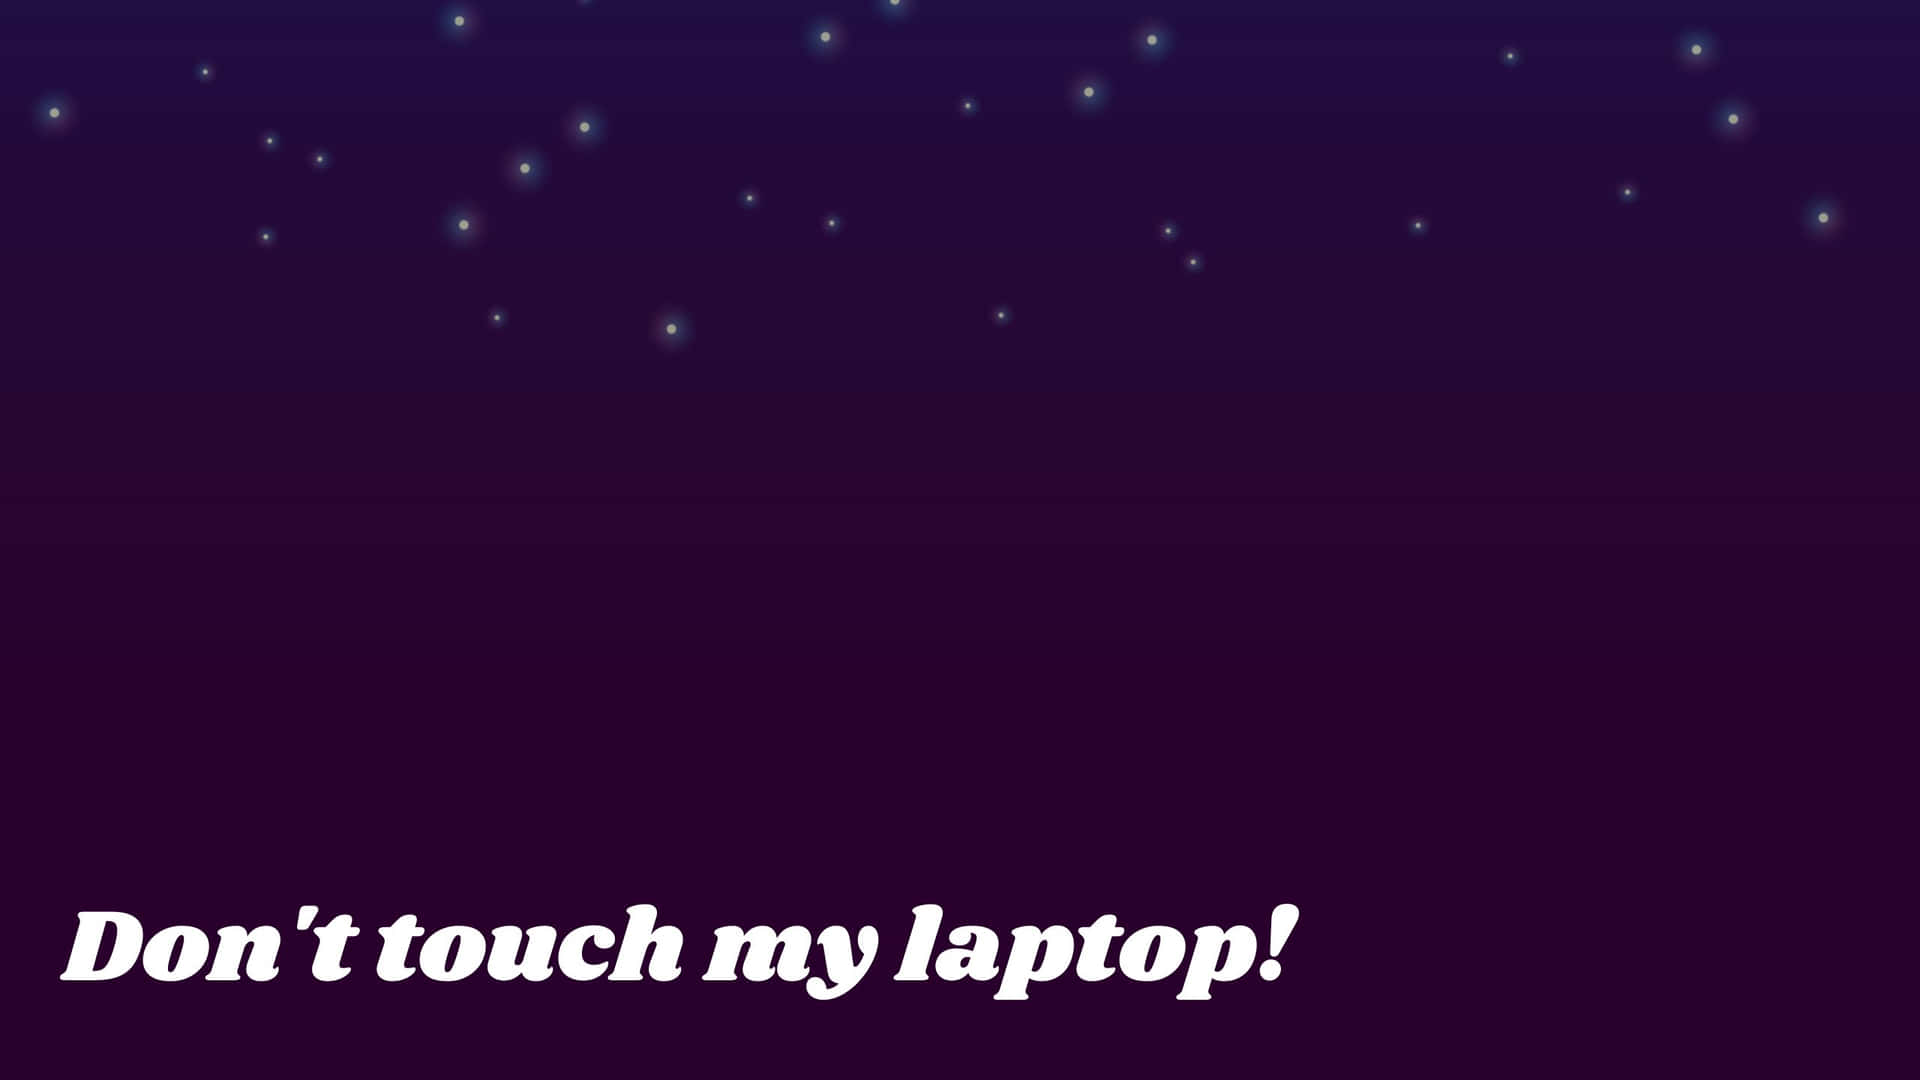 Dark Purple With Stars Don't Touch My Laptop Wallpaper